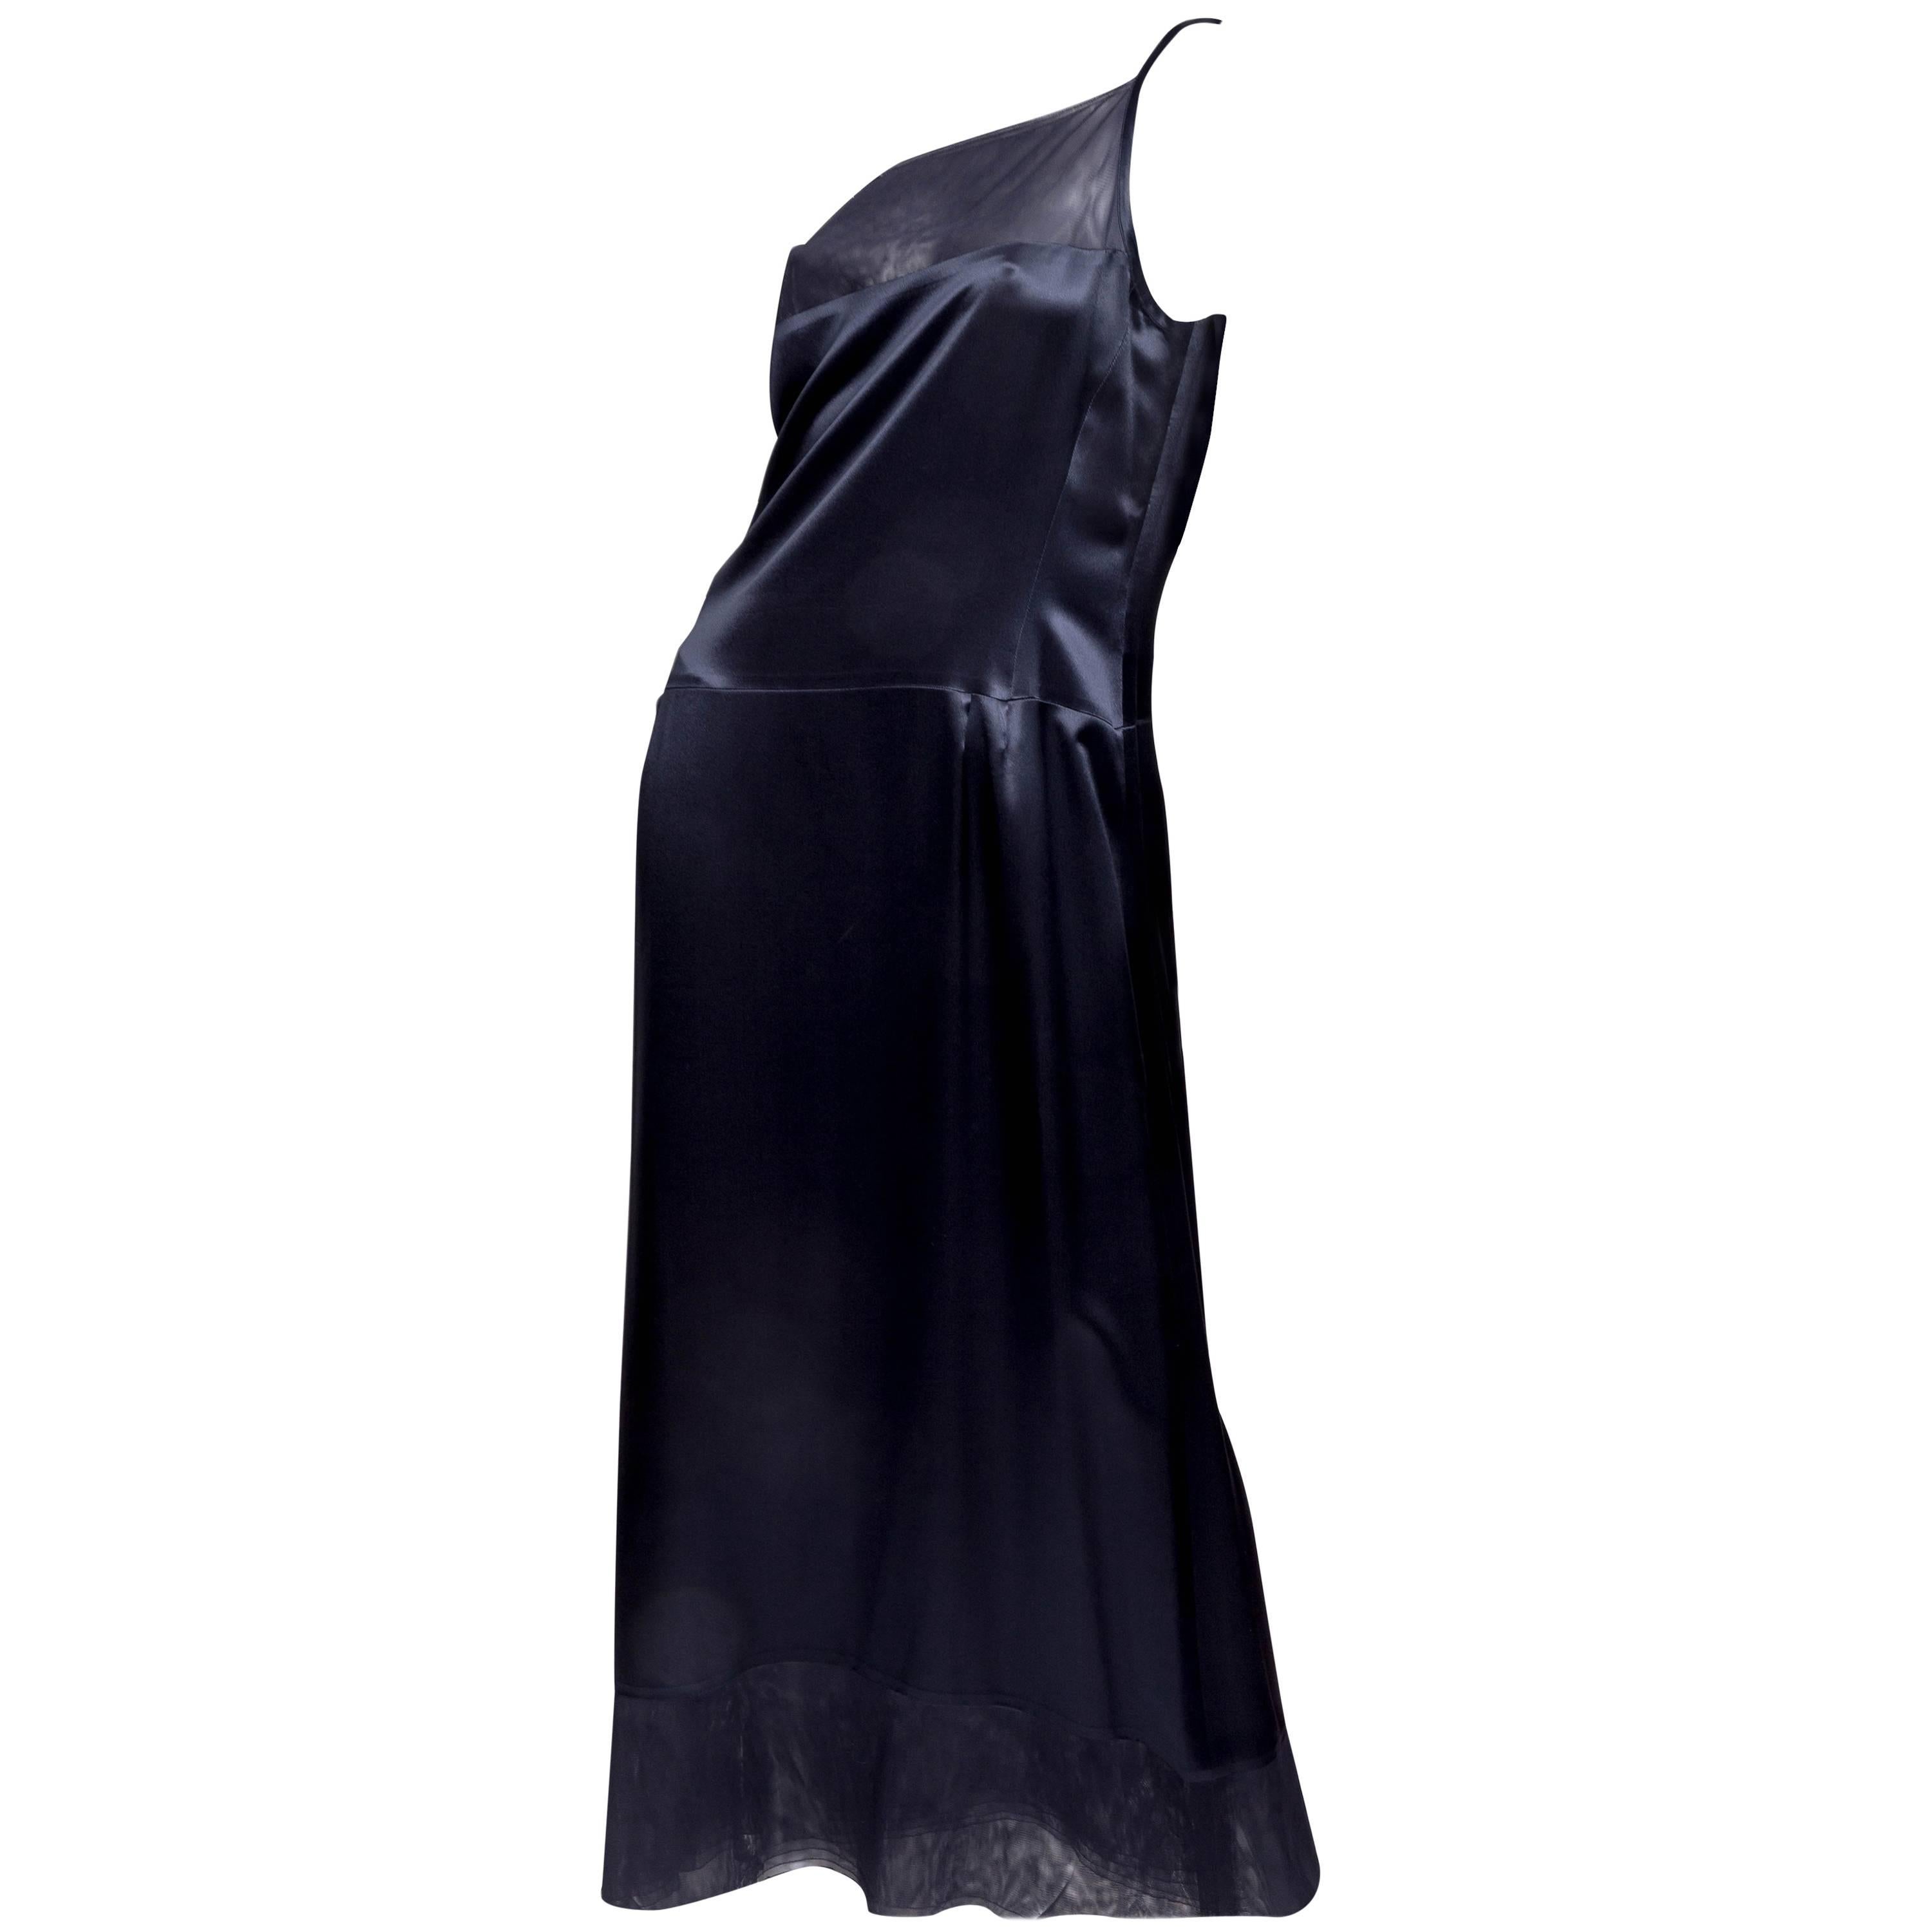 This stunning dress with matching kimono style jacket is the essence of Chanel glamour. Dark blue 100% silk fabric is used for both pieces. This beautifully simple dress has spaghetti straps and is trimmed with sheer tulle at the hem and neck. The